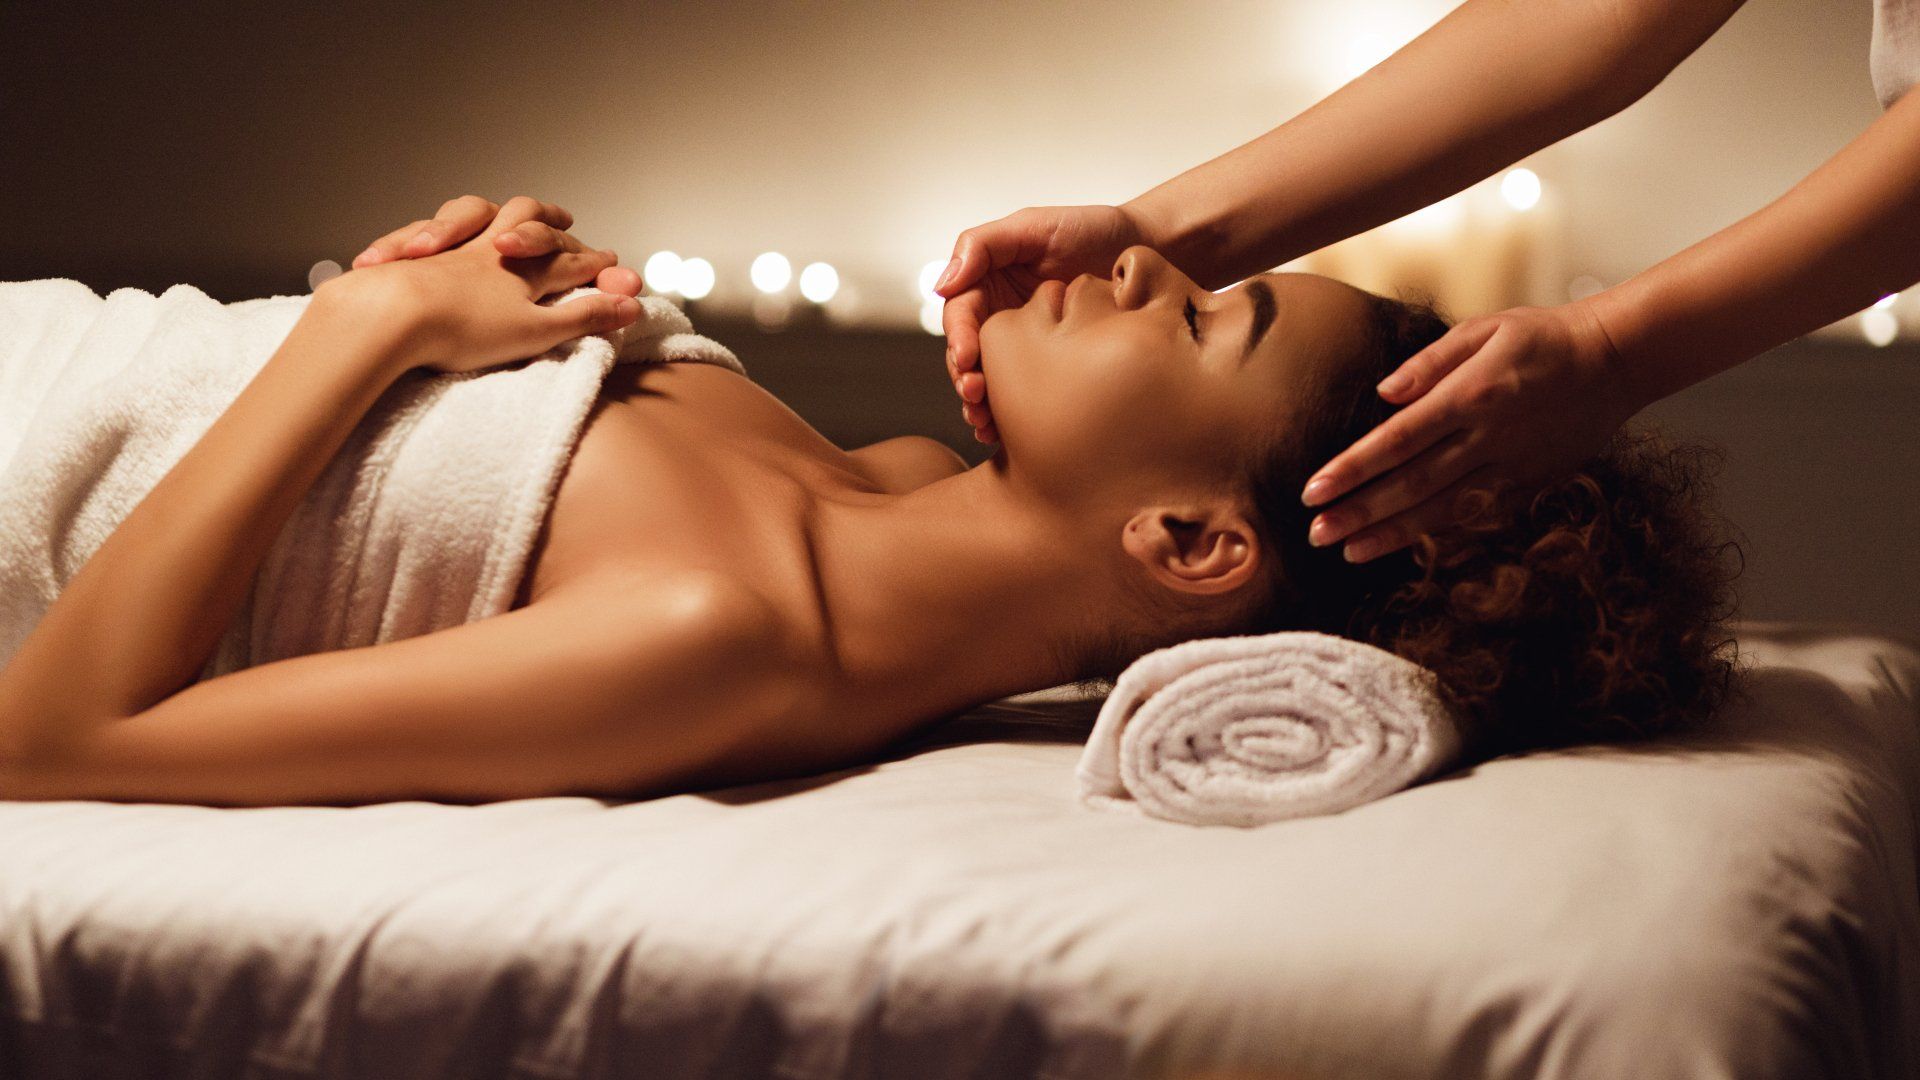 young woman laying her head on a rolled up towel on a relaxing massage bed during a massage therapy session where a massage therapist is massaging her head.